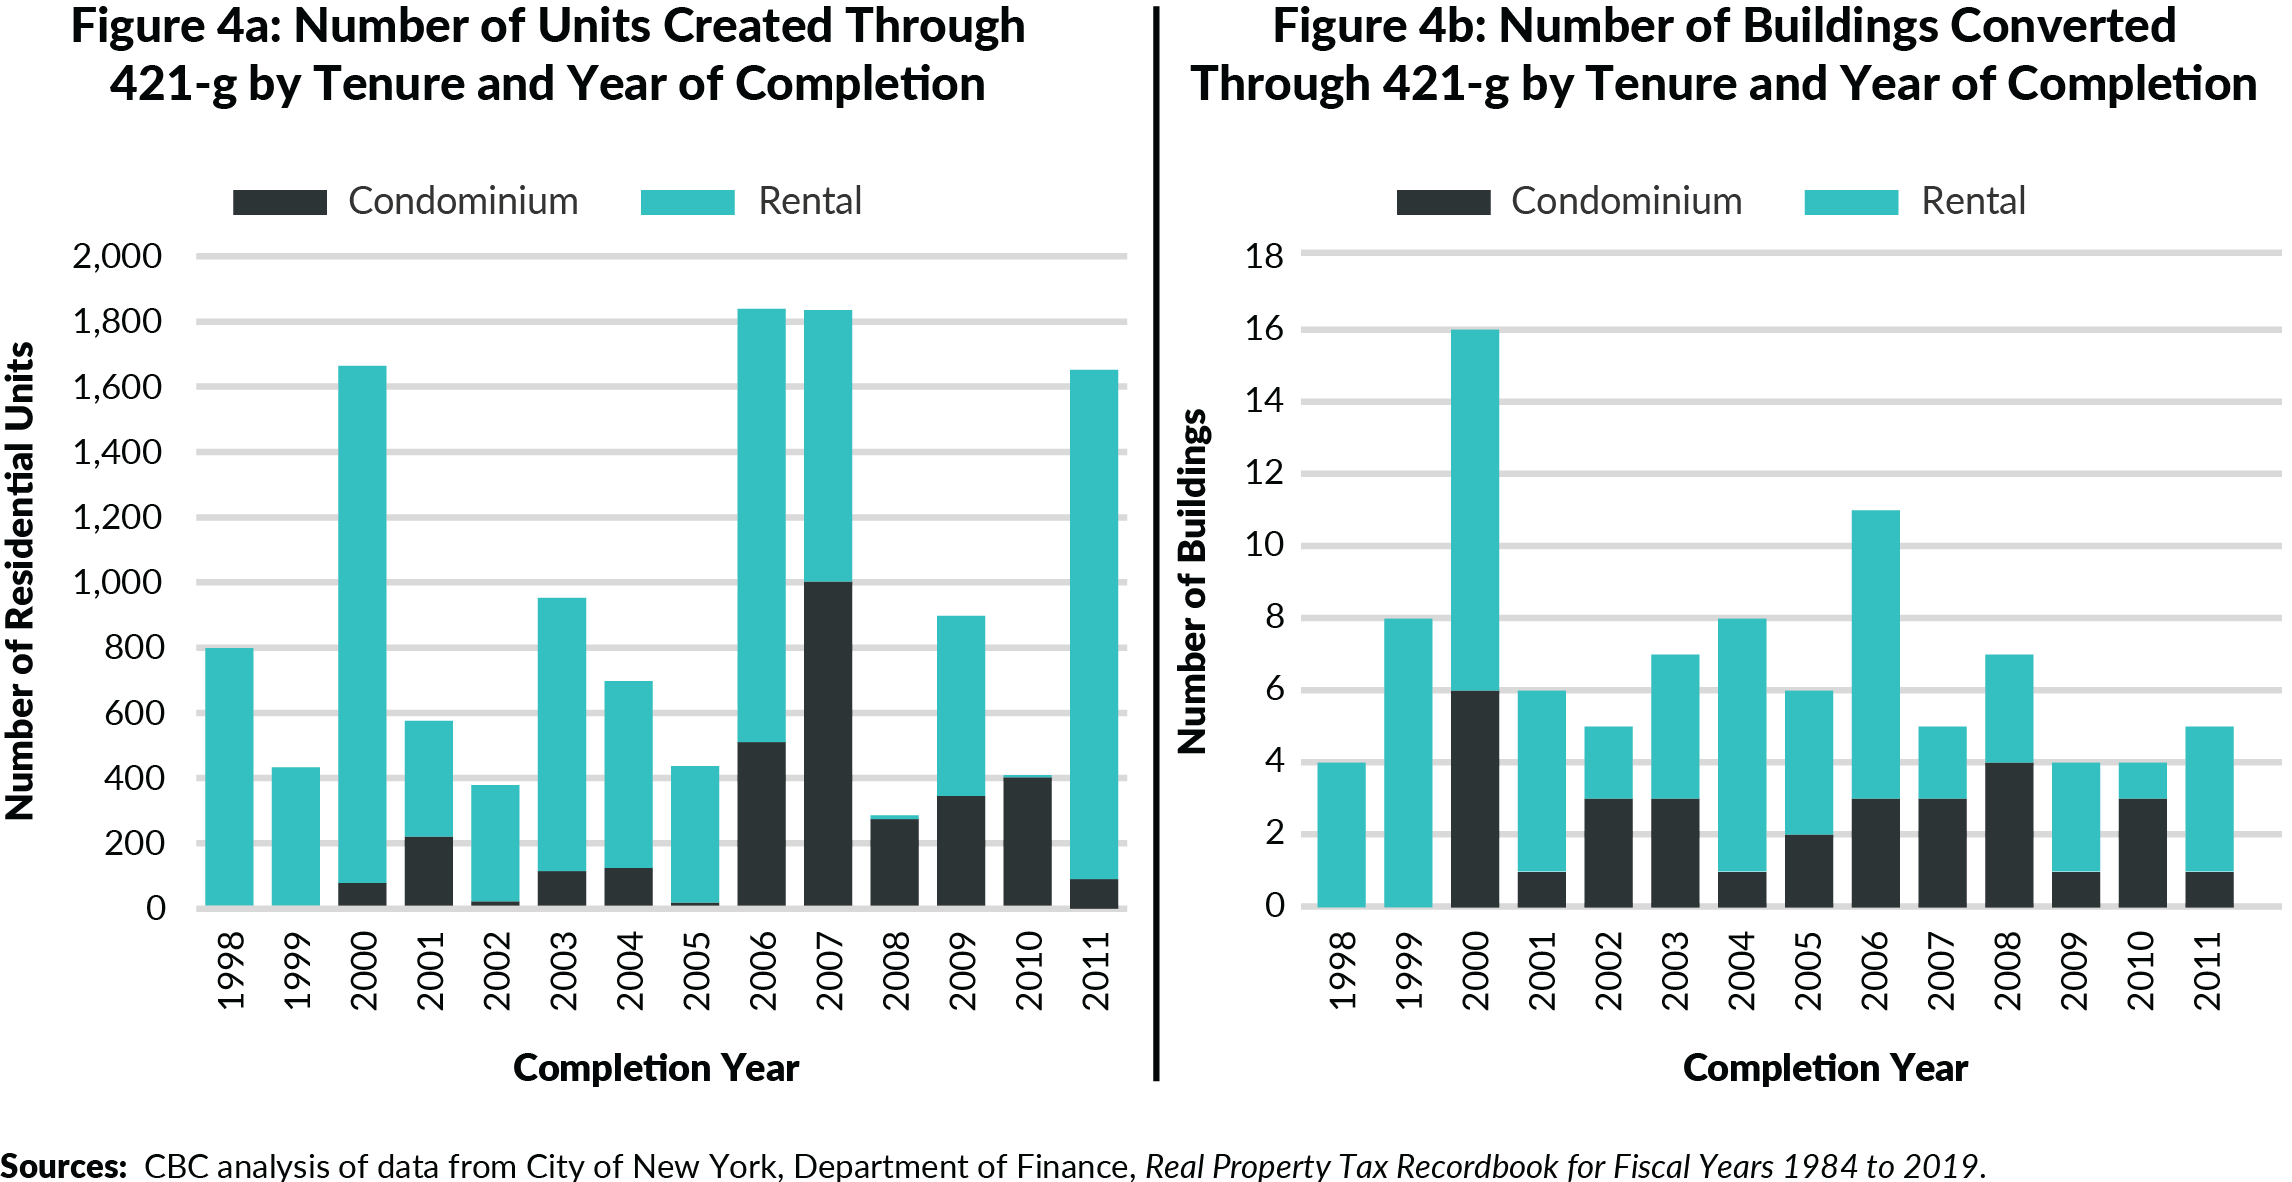 Figure 4A. Number of Units Created through 421-g by Tenure and by Year of Completion; Figure 4B. Number of Buildings Converted through 421-g by Tenure and by Year of Completion